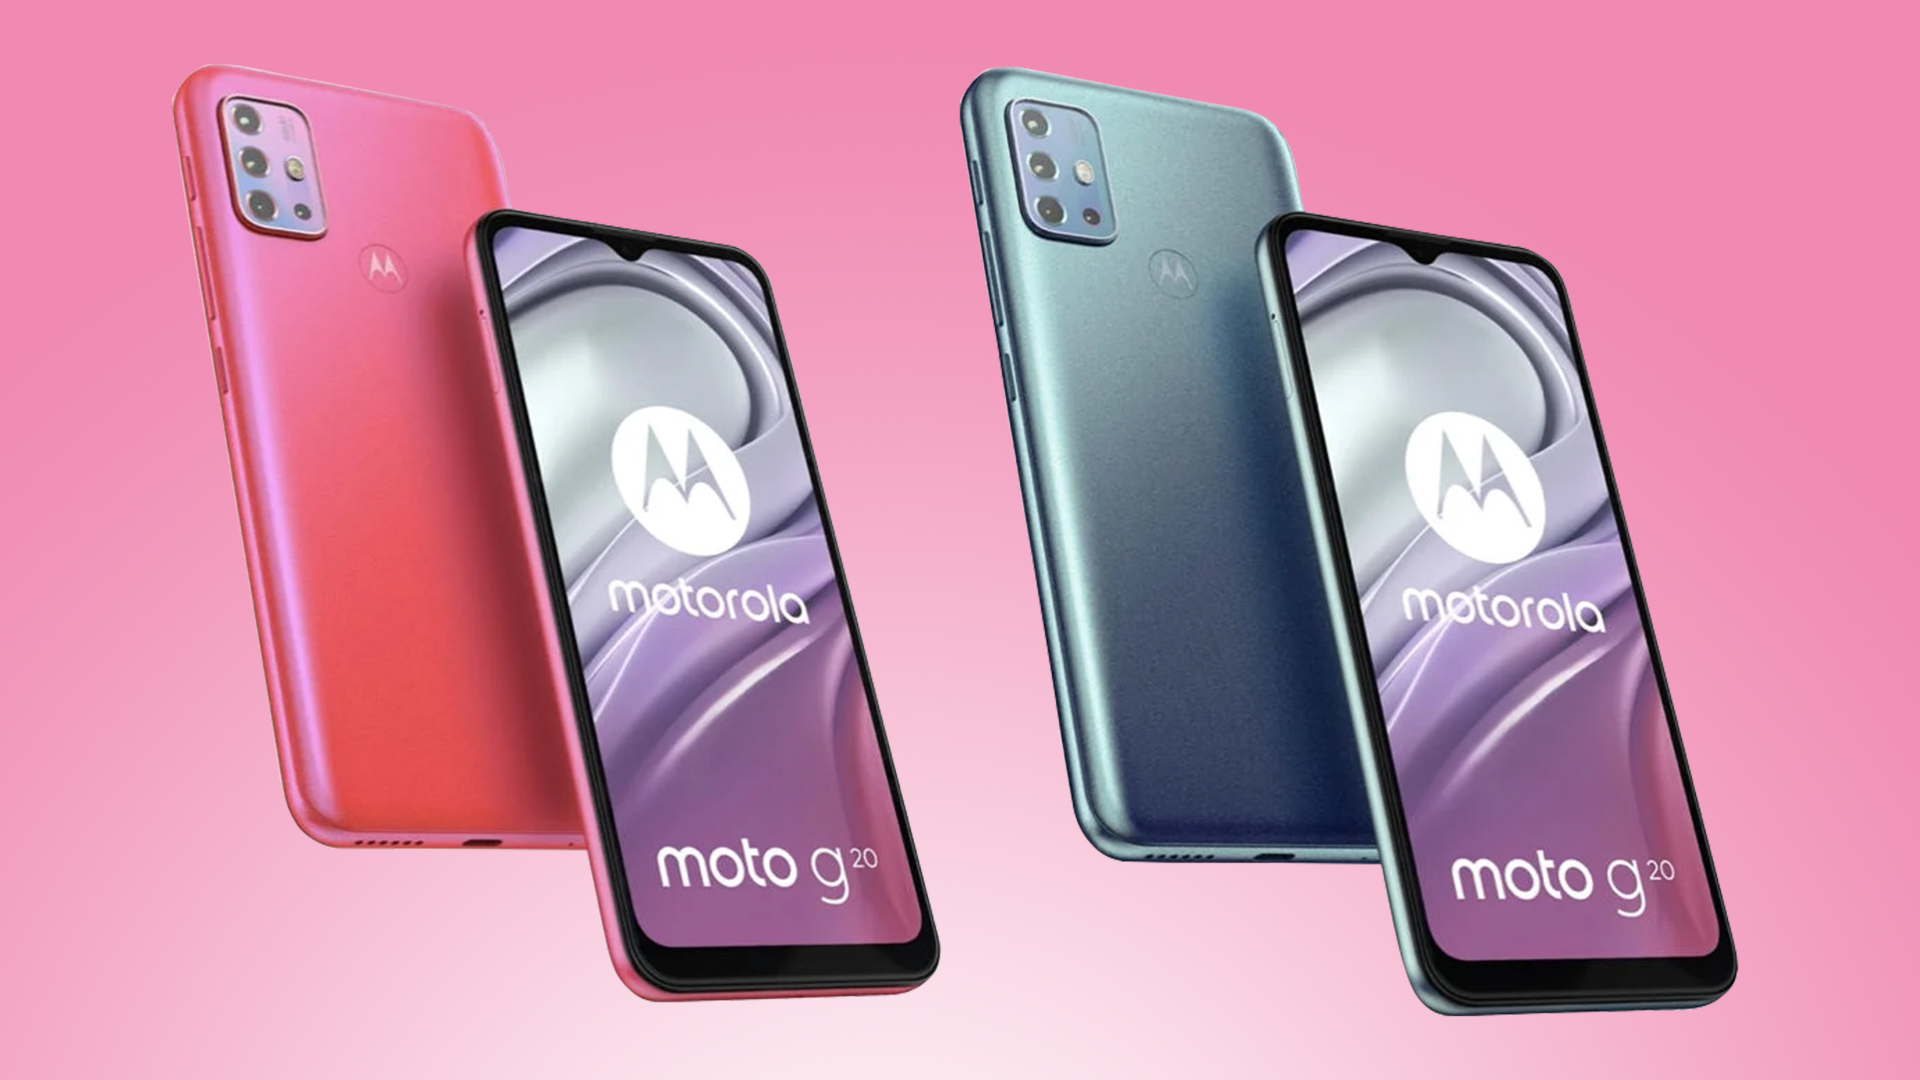 Forget Google Pixel 5a: Moto G20 packs 5,000 mAh battery, 90Hz display for cheap | Tom's Guide